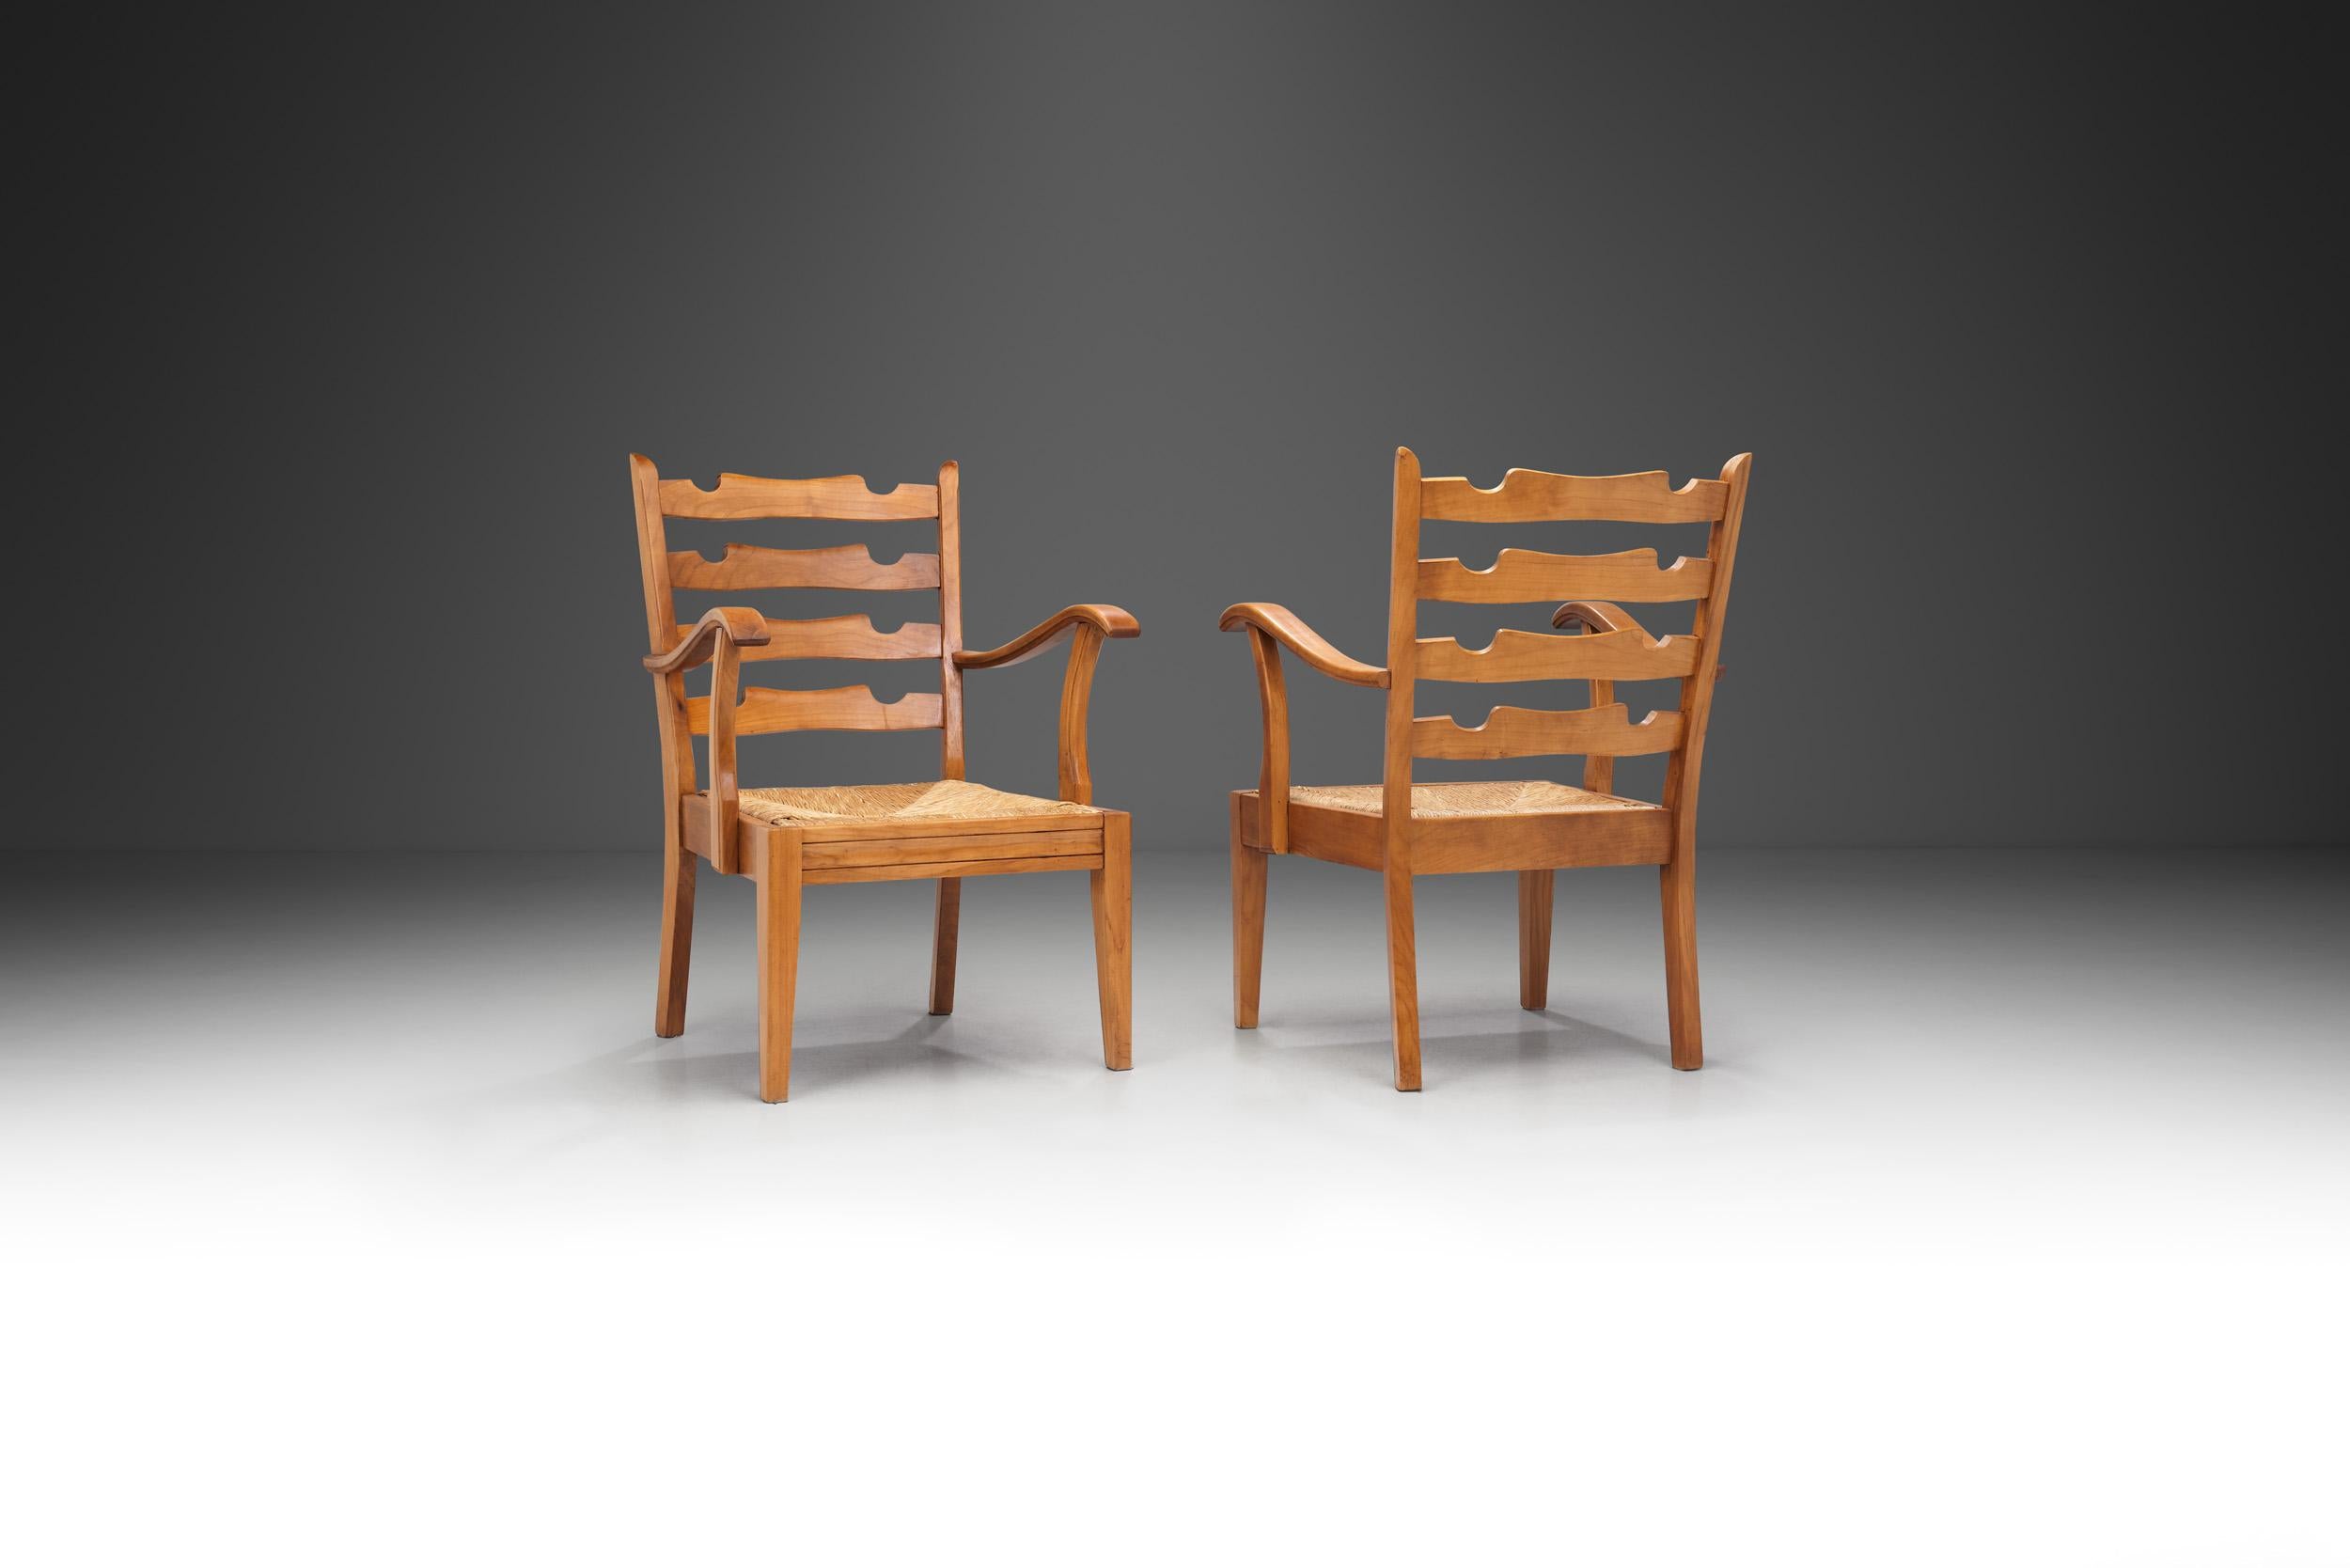 Mid-Century Modern French Cherry Wood Chairs with Seats of Woven Papercord, France 1950s For Sale